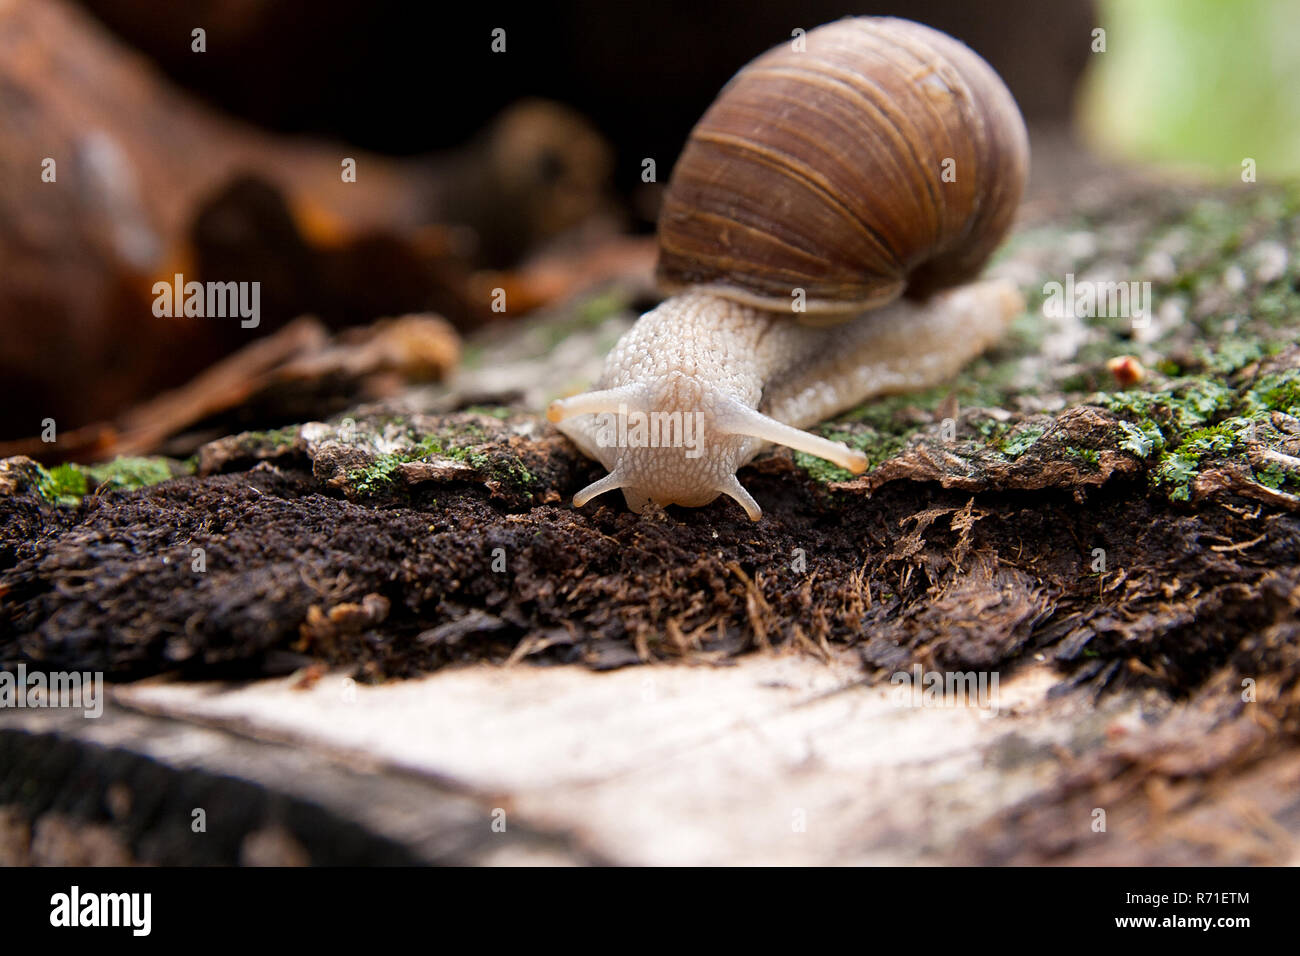 Burgundy snail (Helix pomatia, Roman snail, edible snail, escargot) crawling on its road. Close up view of brown tree bark with moss and fungus. Big s Stock Photo